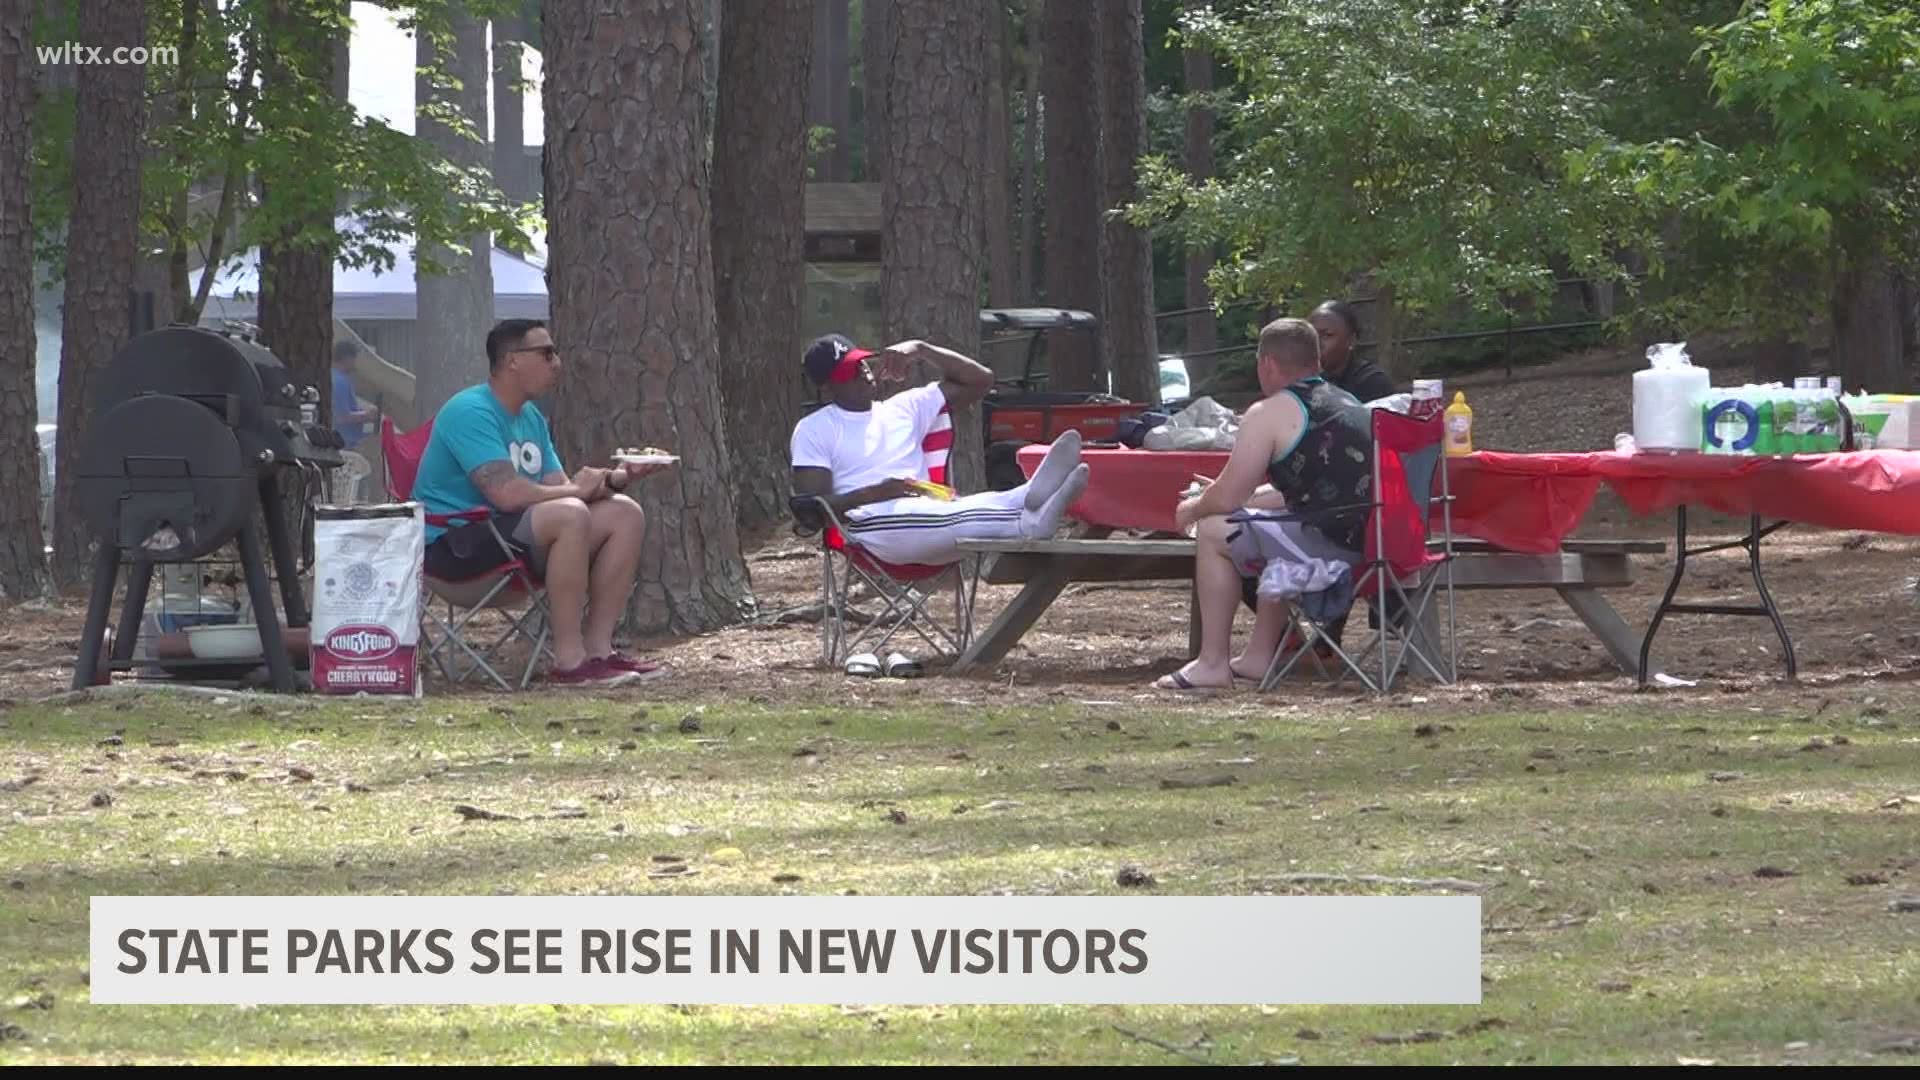 Gates close due to capacity at area parks as weather turns warm, people emerge from pandemic